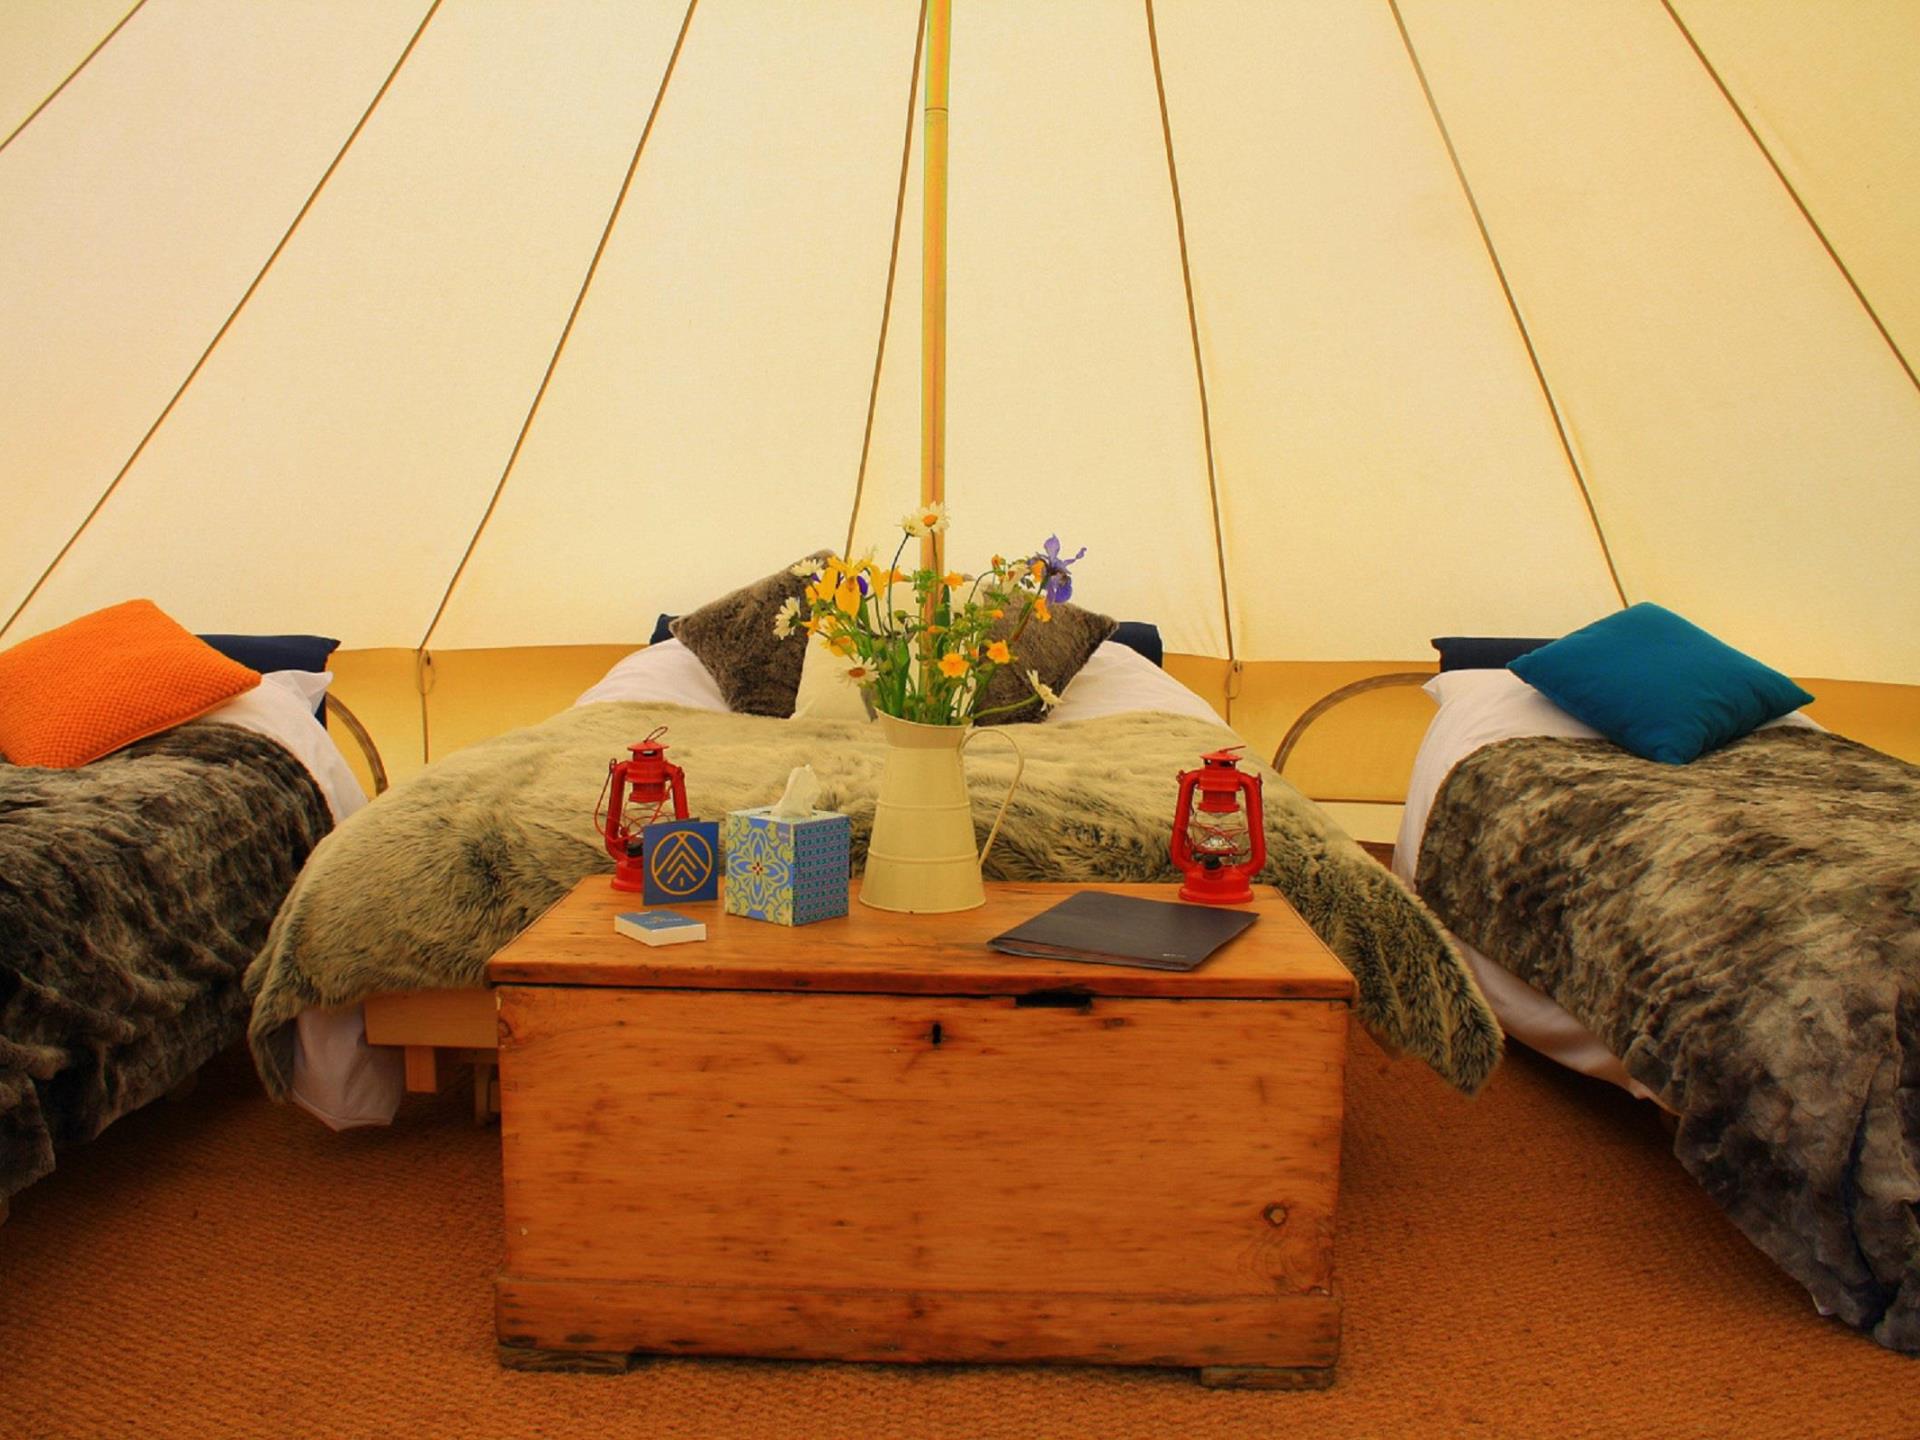 All our tents come with real beds and carpets